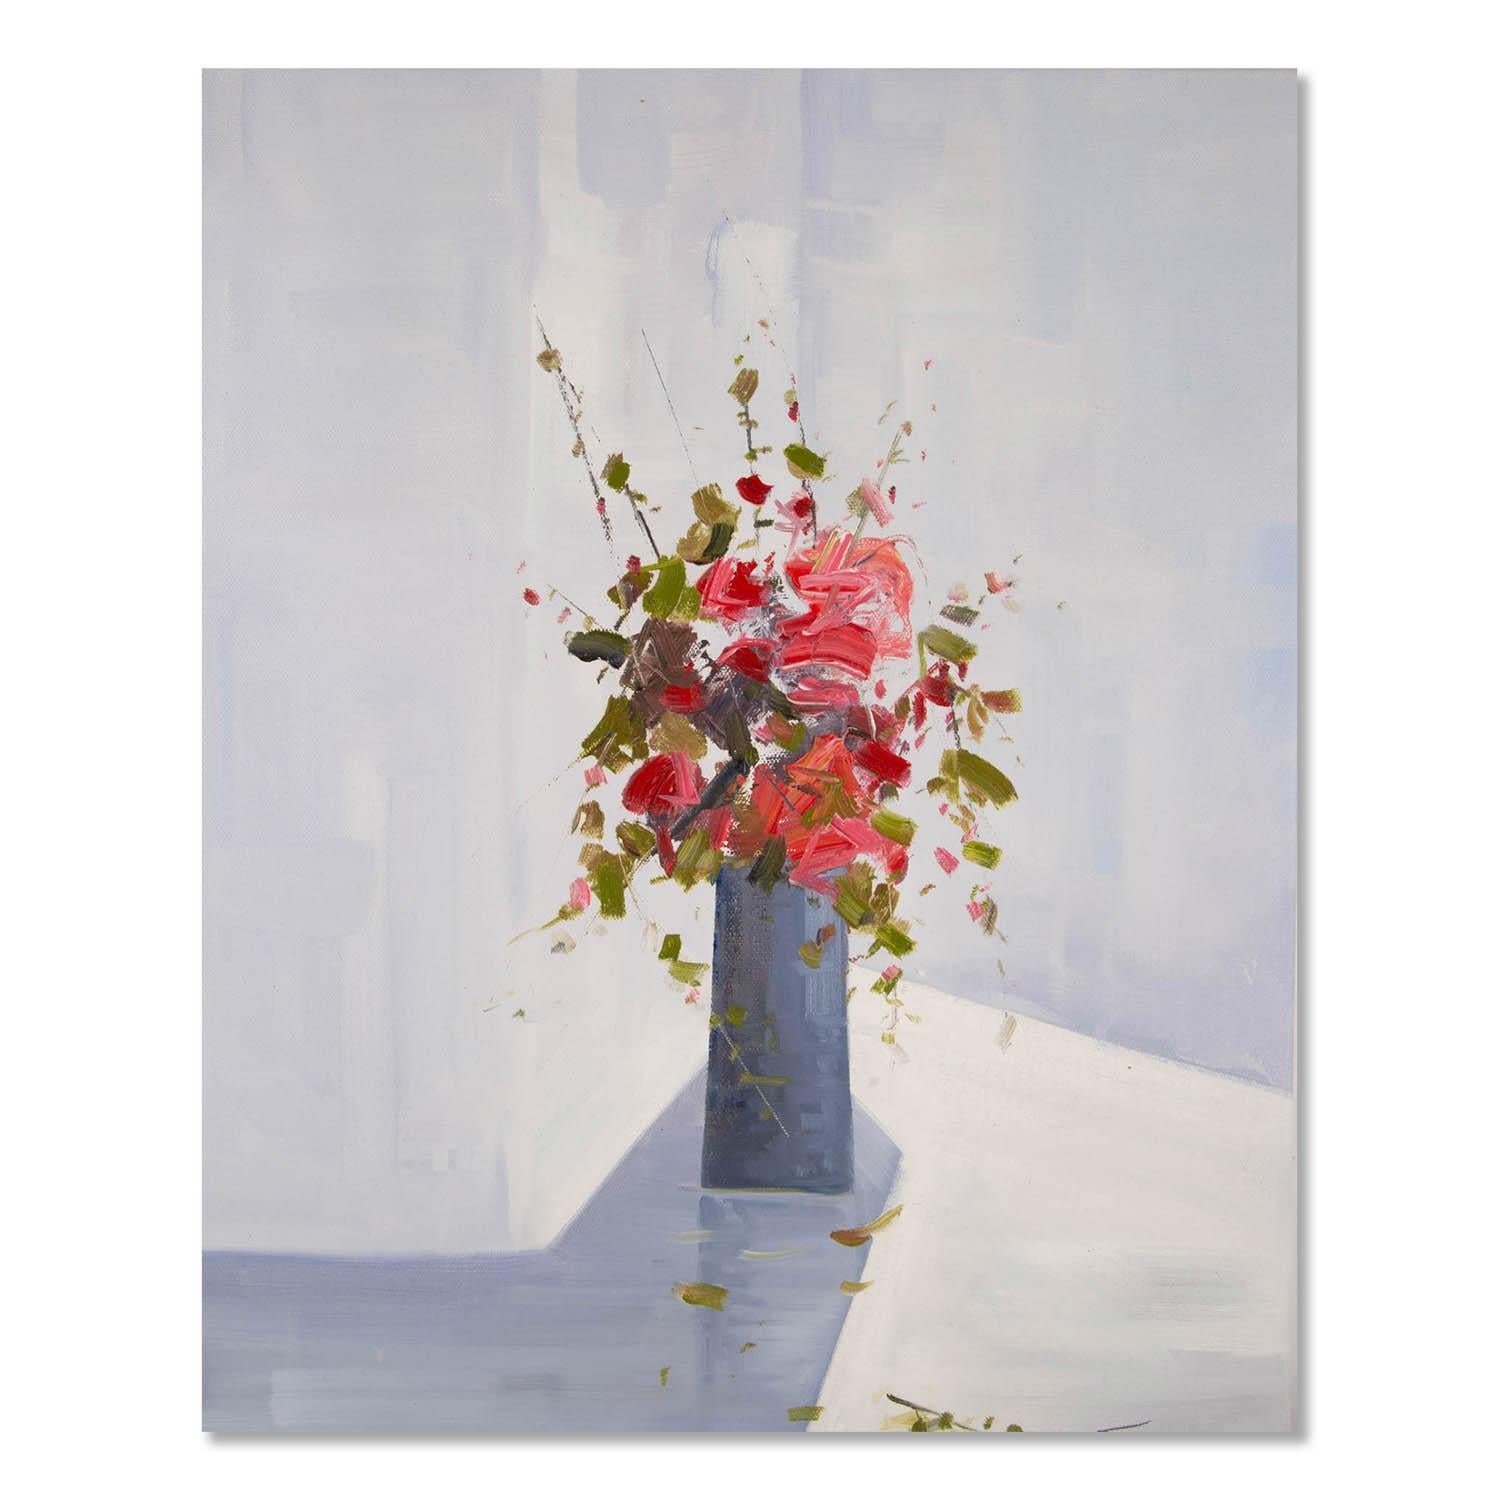  Title: Flower In The Vase
 Medium: Oil on canvas
 Size: 25 x 19 inches
 Frame: Framing options available!
 Condition: The painting appears to be in excellent condition.
 
 Year: 2015
 Artist: Shuxing Tian
 Signature: Signed
 Signature Location: